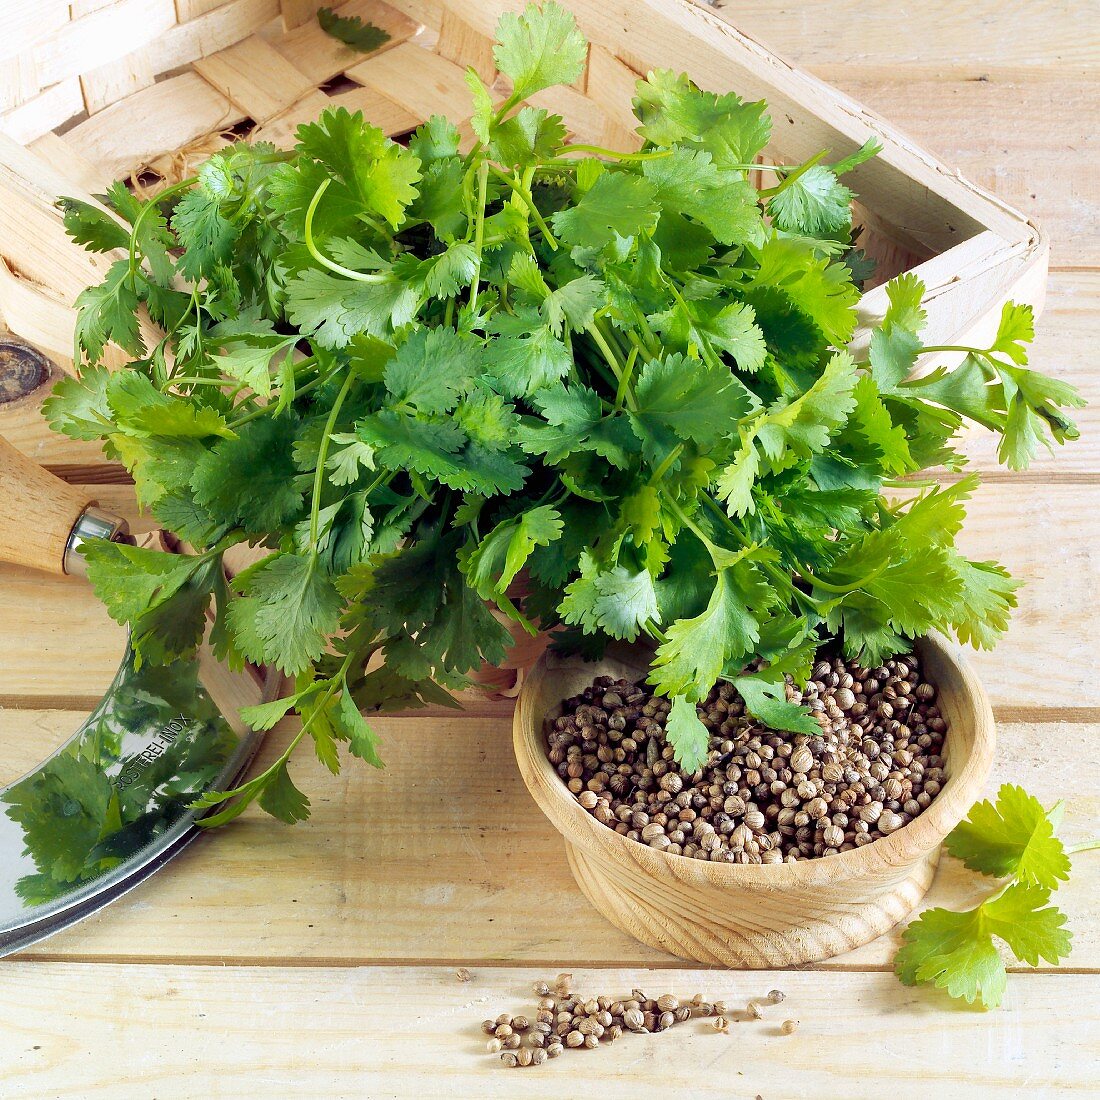 Coriander seeds and leaves